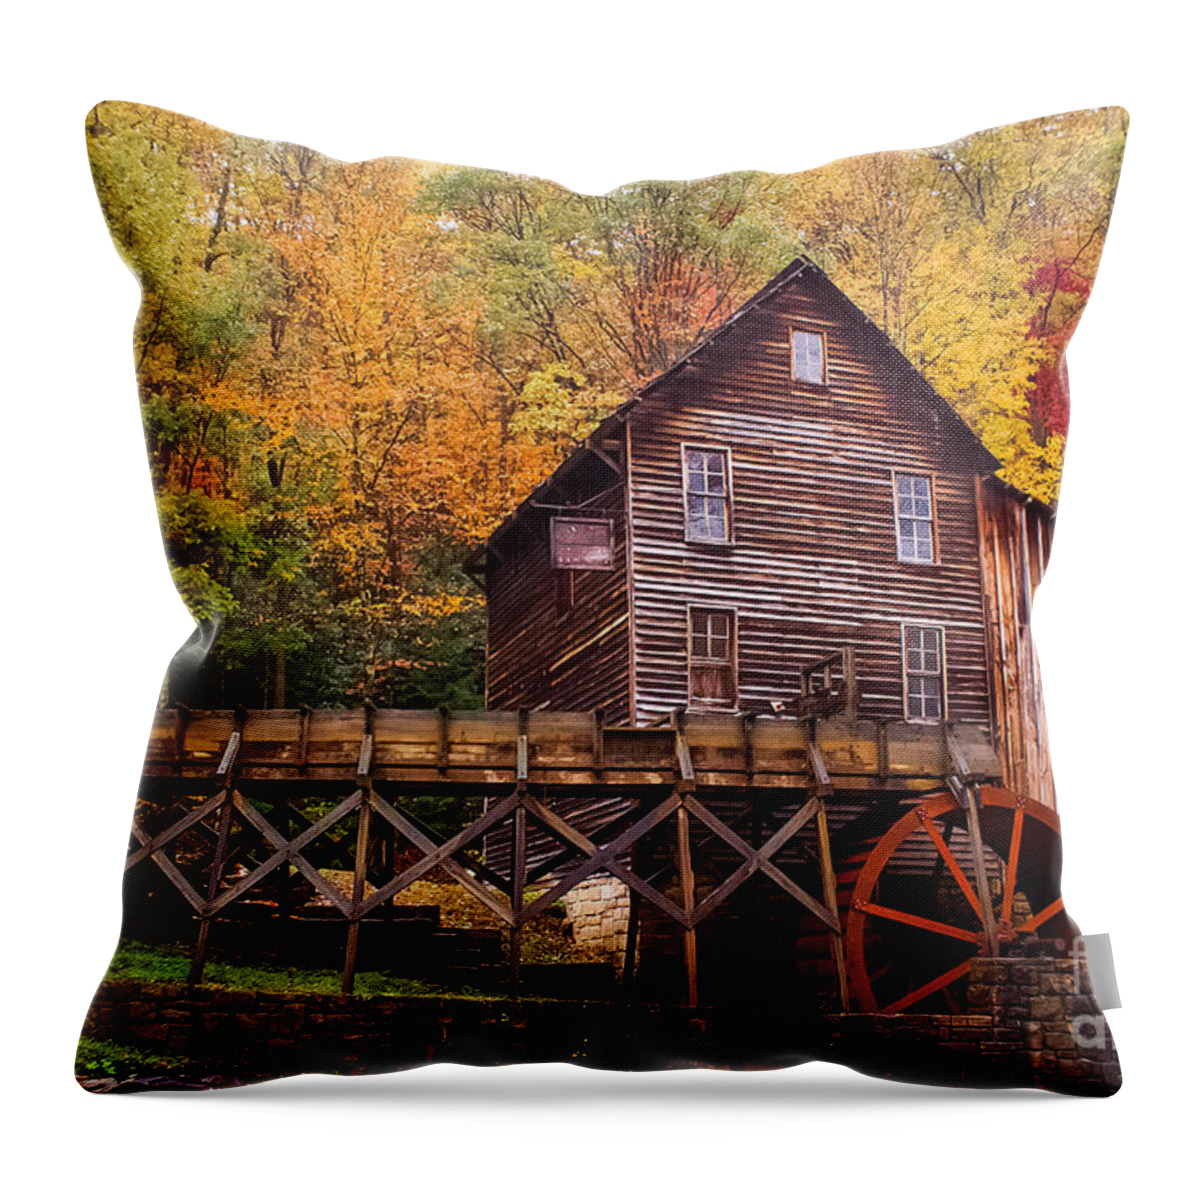 Glade Creek Grist Mill Throw Pillow featuring the photograph Glade Creek Grist Mill by M Three Photos